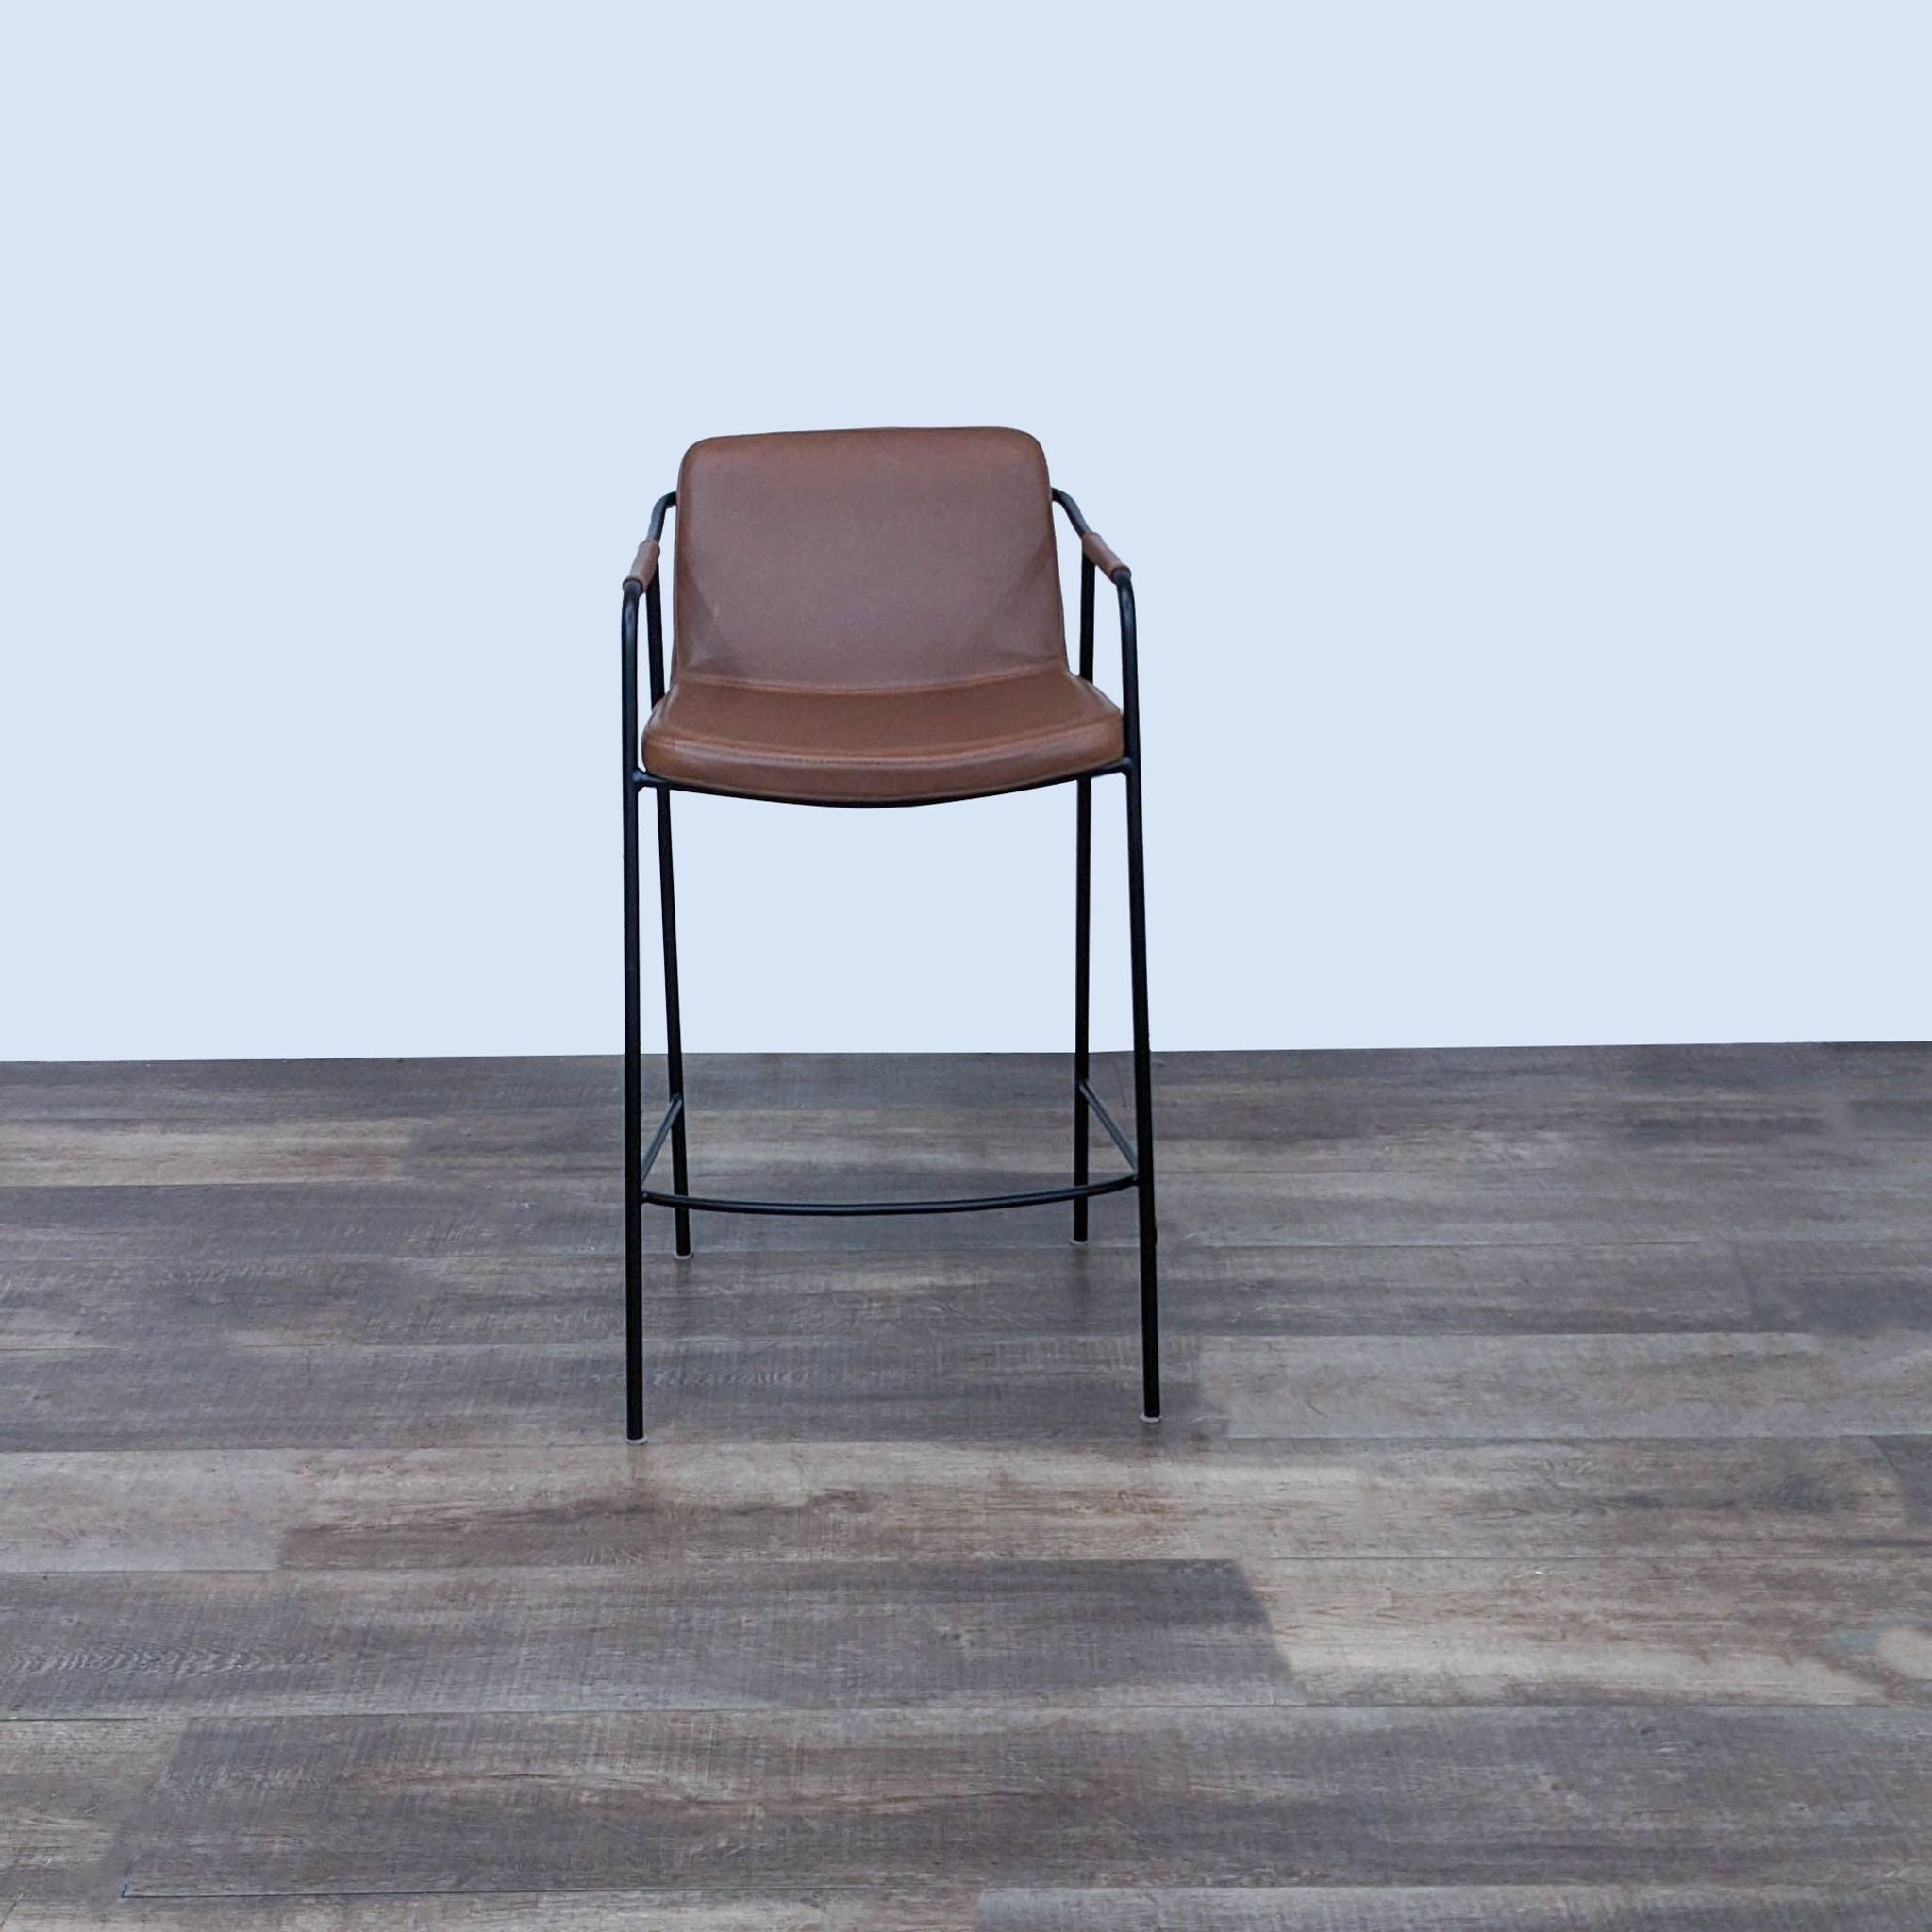 Room & Board minimalist brown leather-look counter stool with a black steel frame on a wooden floor.